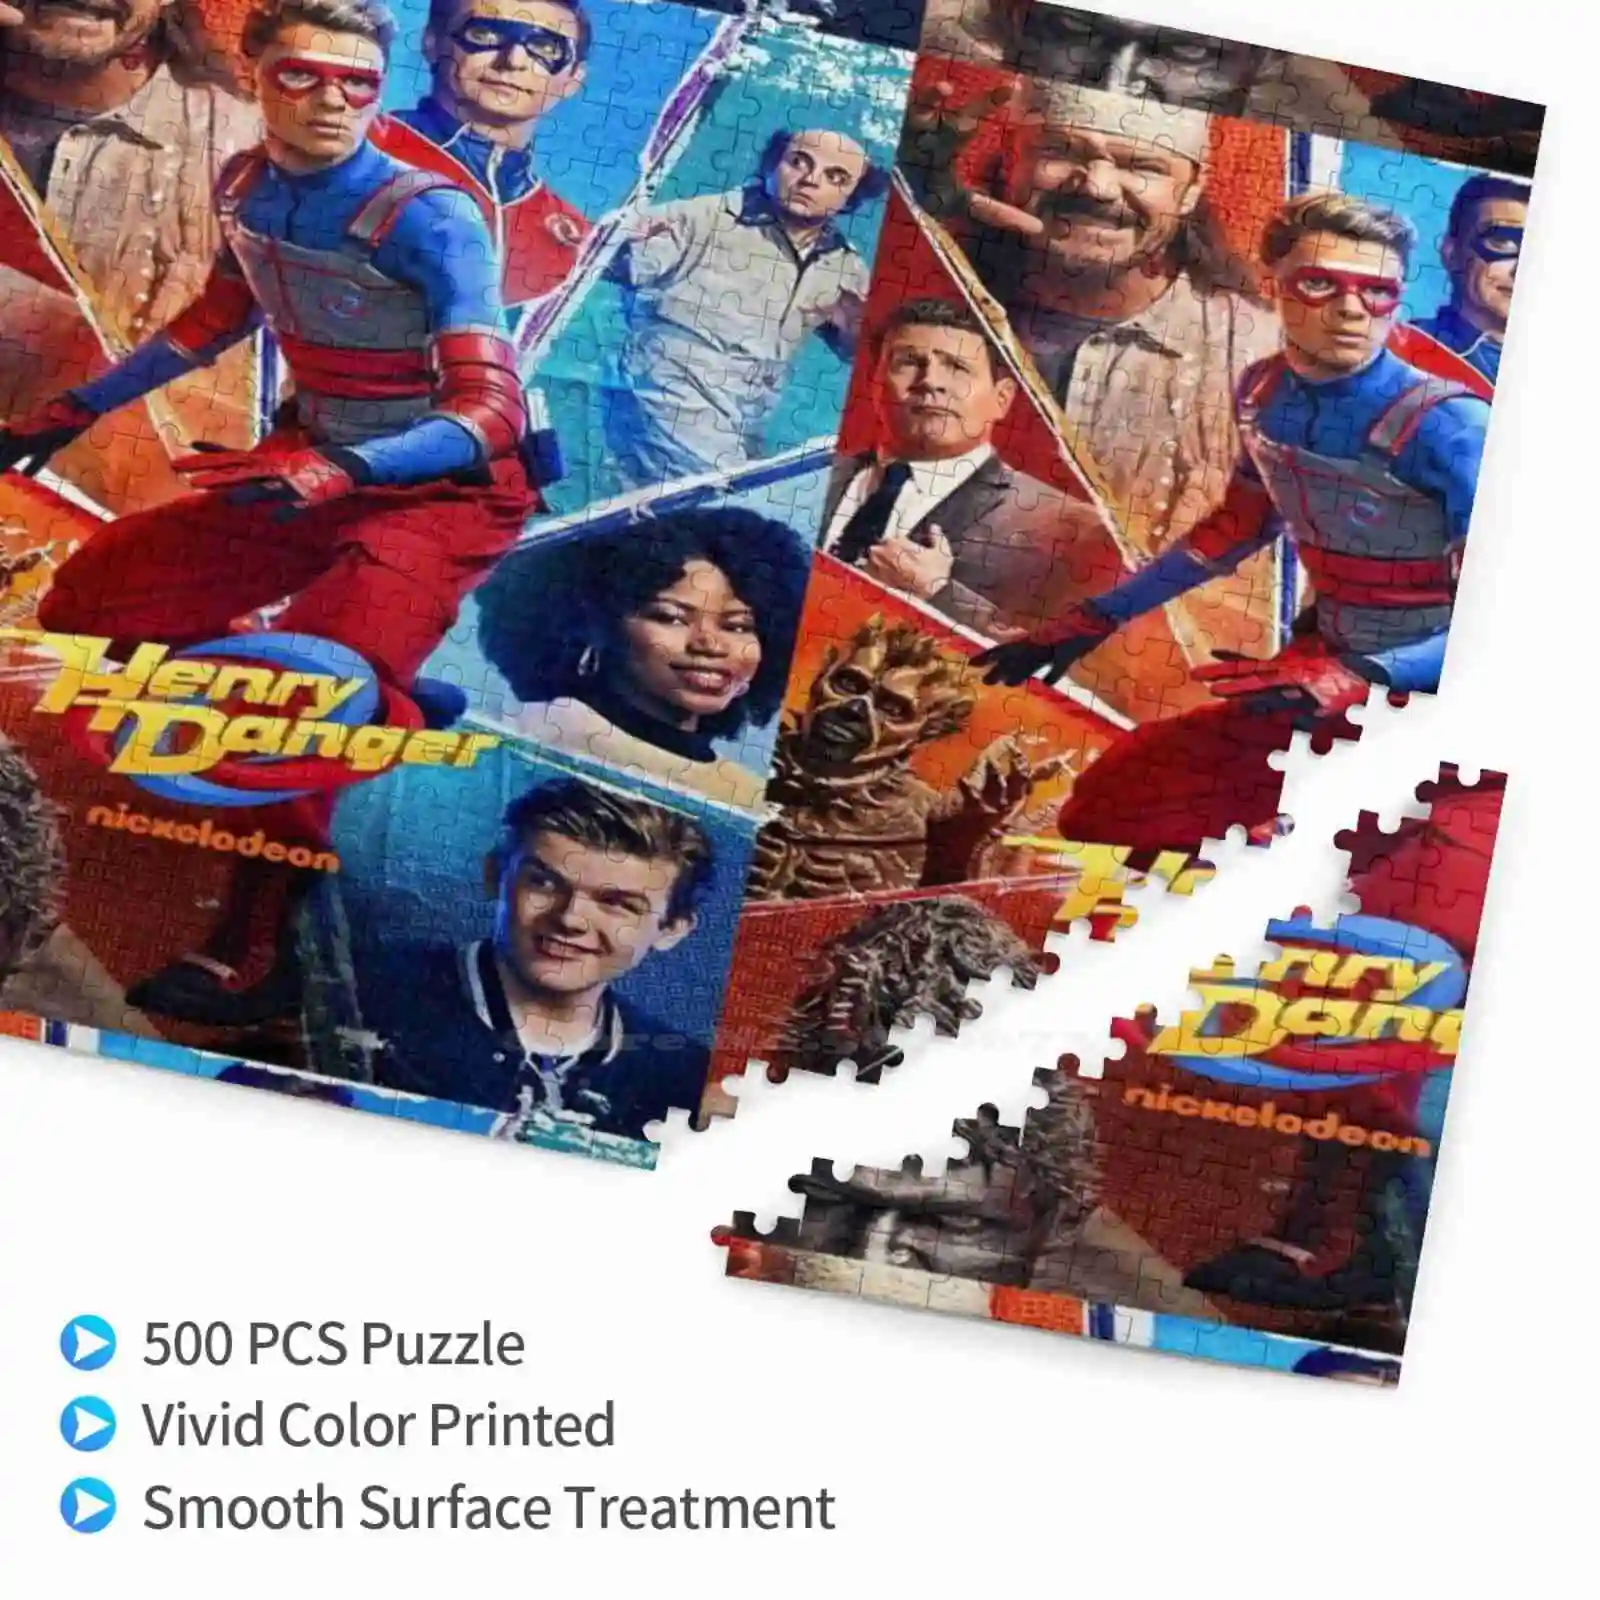 Henry-Danger-Poster Jigsaw Puzzles Wooden Fun Intellectual Decompressing Relax Toy for Family Friends Kids